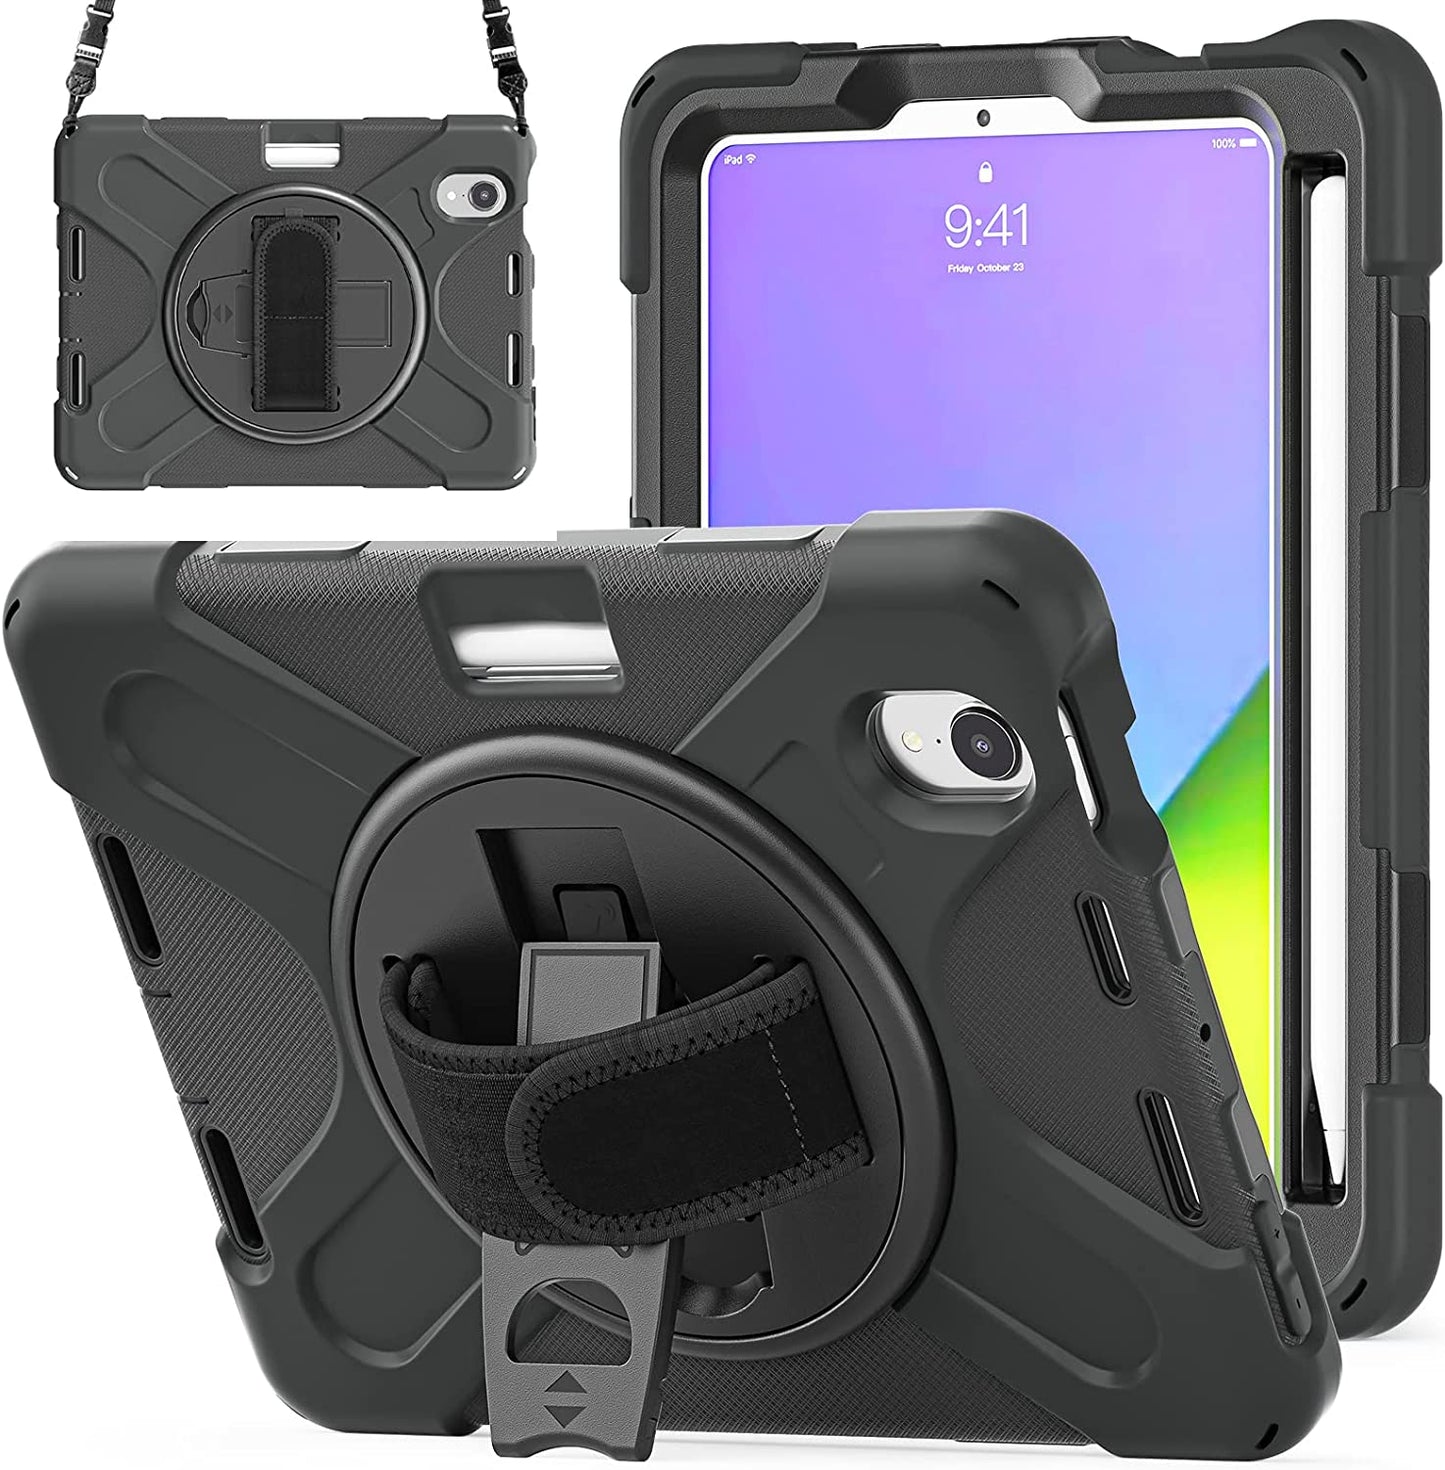 Yapears New iPad Mini 6 Case 2021, Yapears Heavy Duty Shockproof Rugged Mini 6 Case A2567/A2568/A2569 with Pencil Holder Kickstand Hand Strap Carrying Shoulder Belt for iPad Mini 6 Tablet,Black